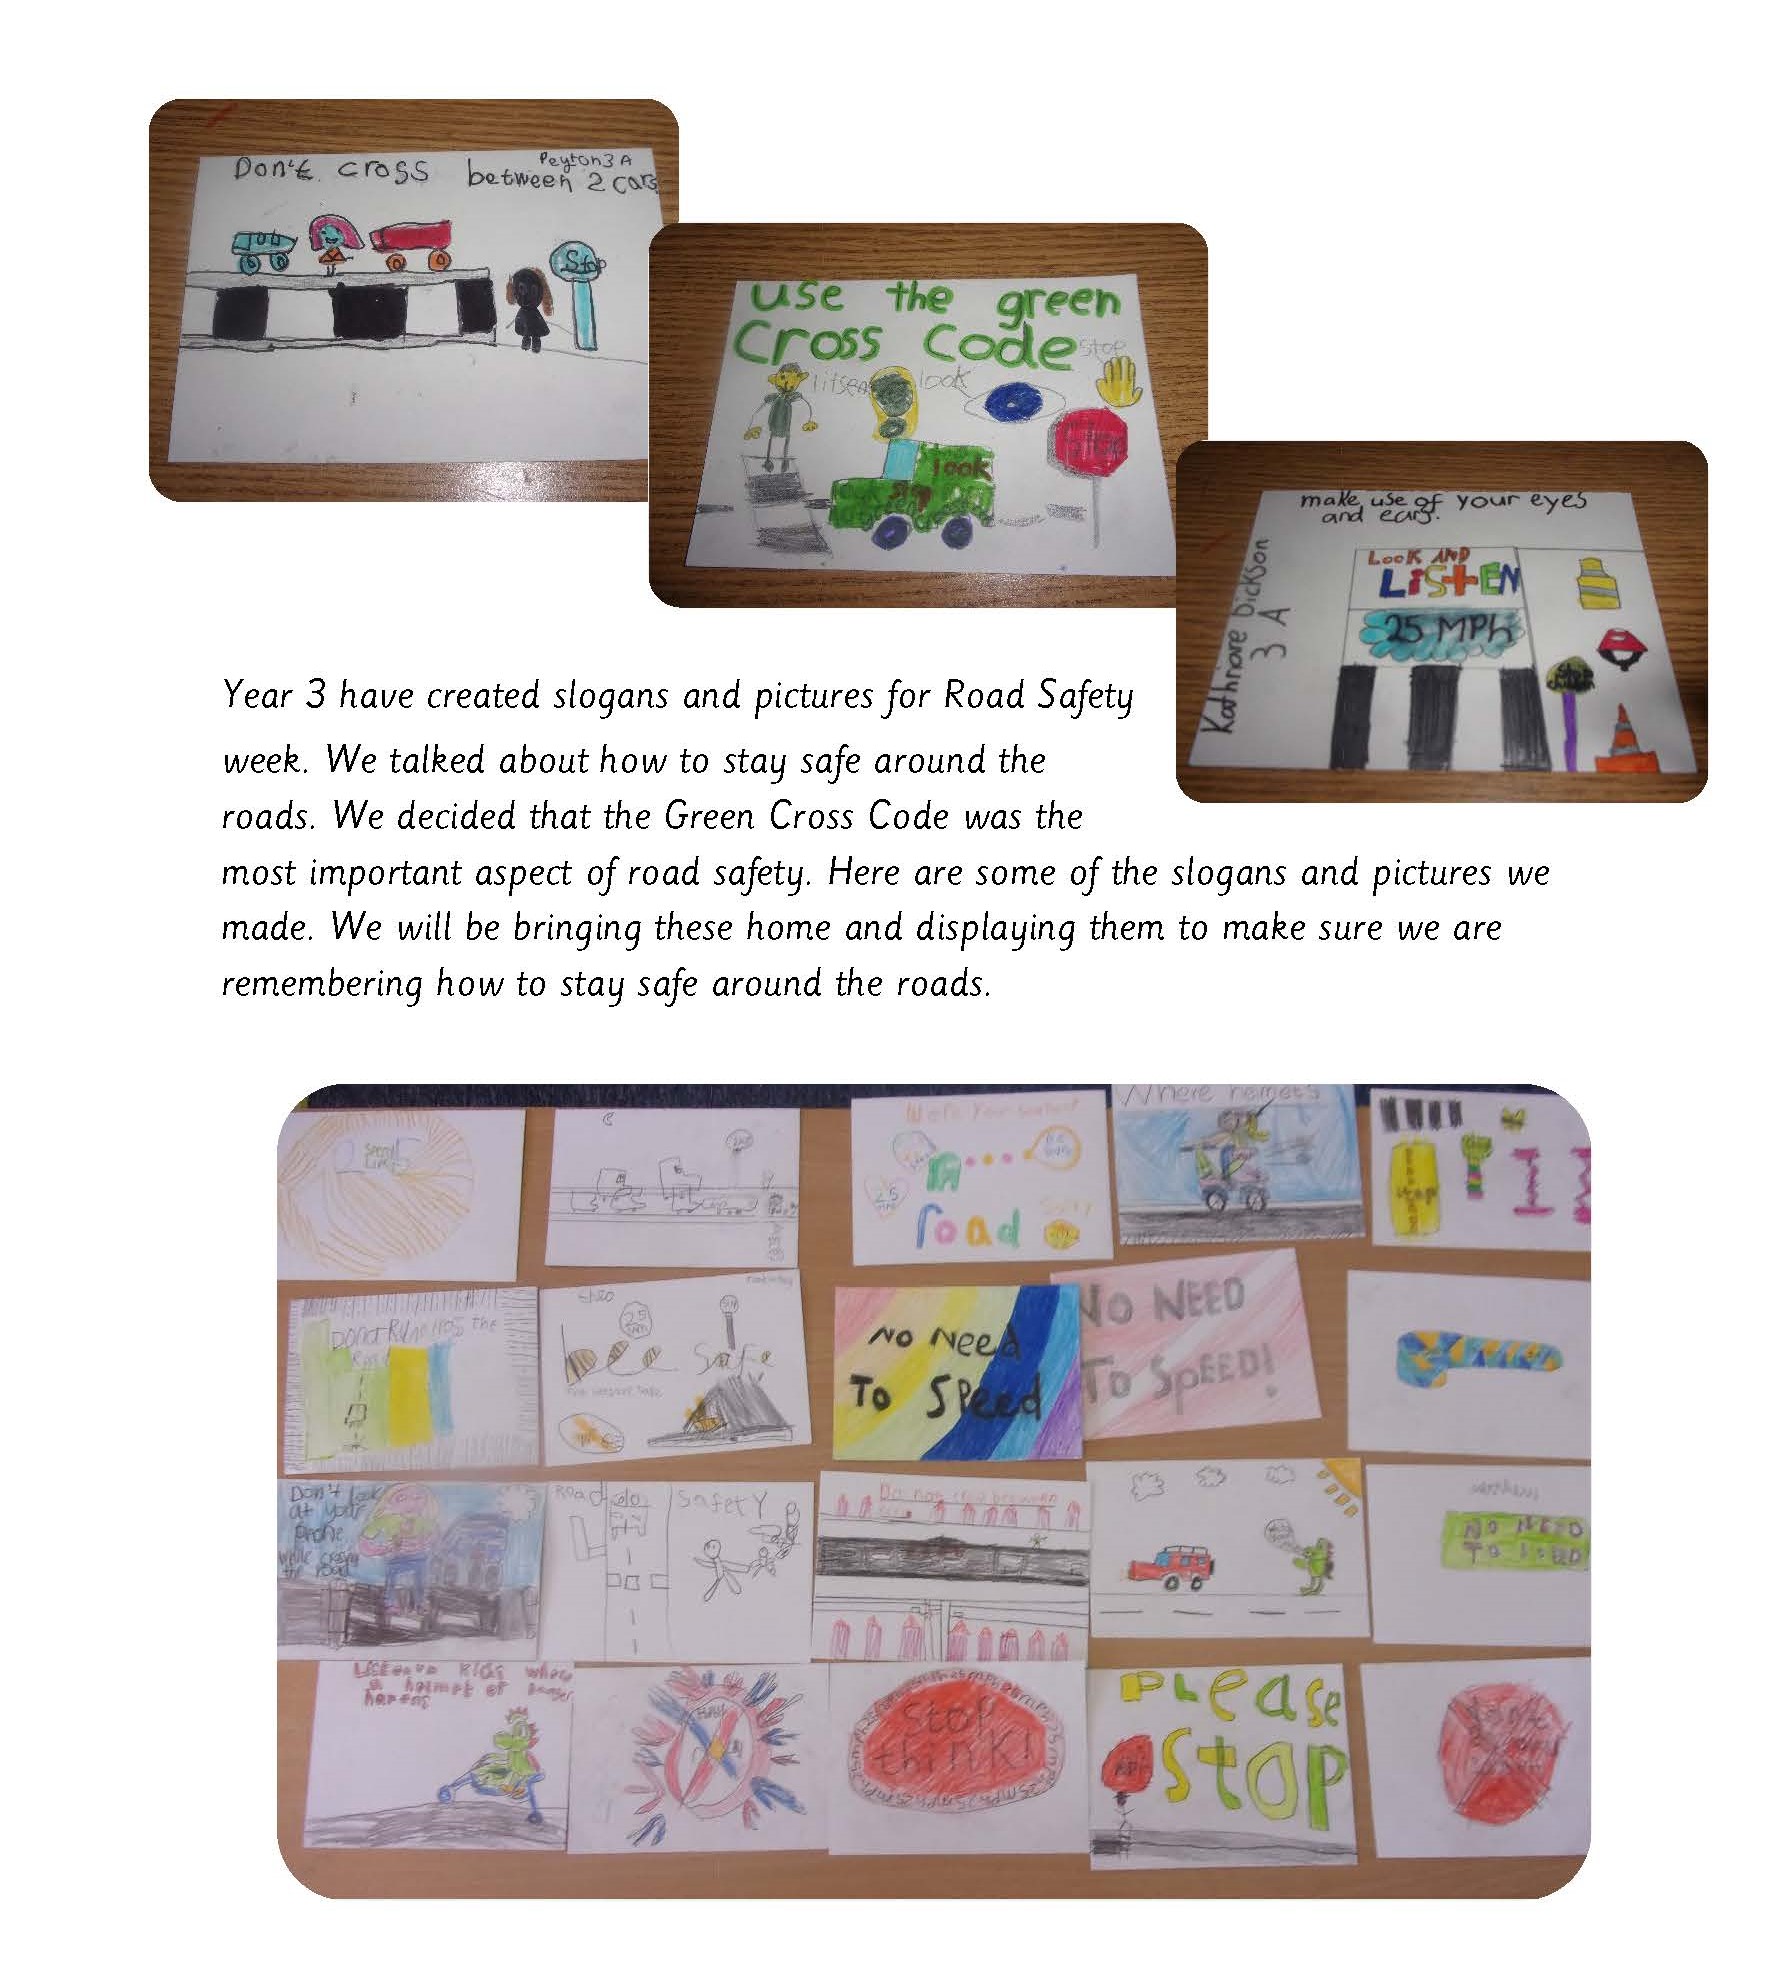 Year 3 have created slogans and pictures for Road Safety week